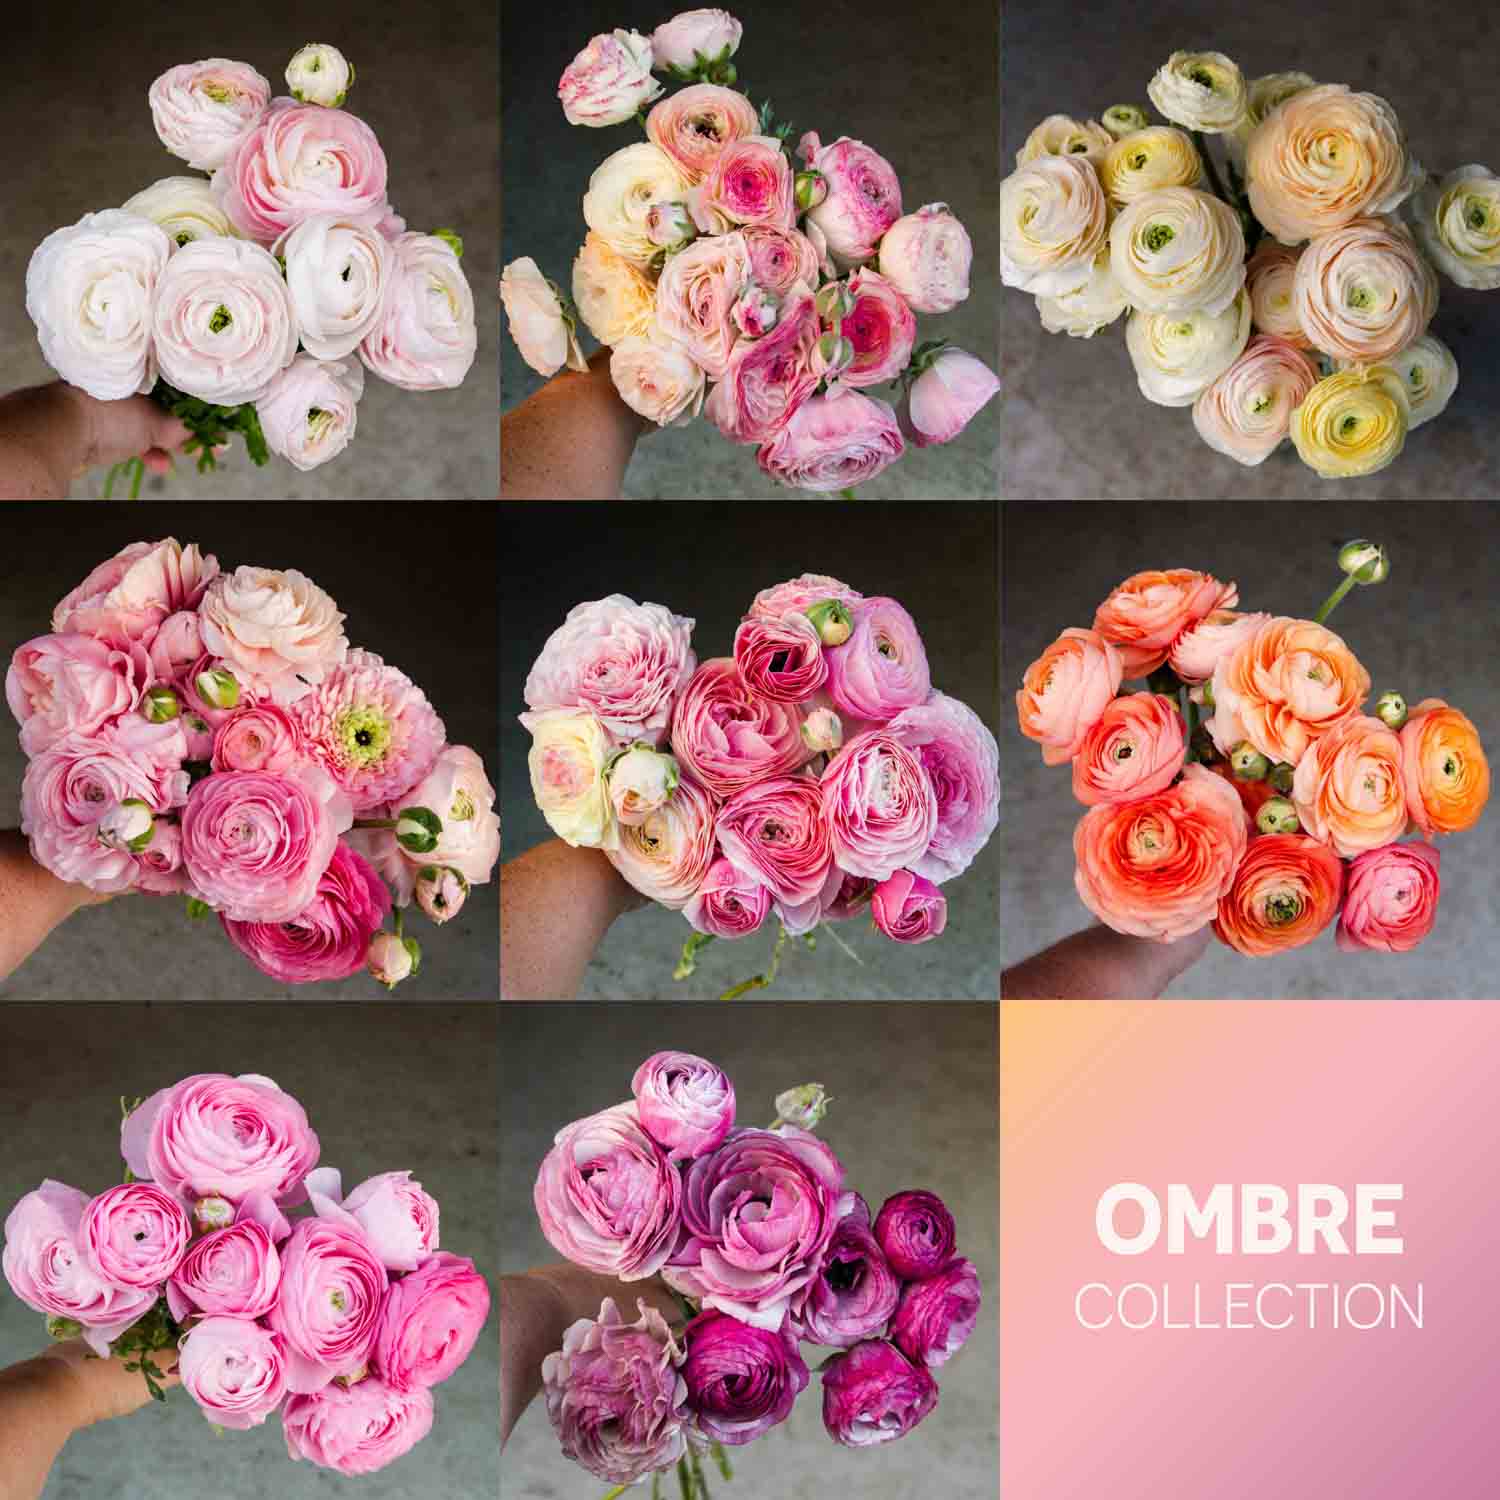 RANUNC Plant Collection - OMBRE